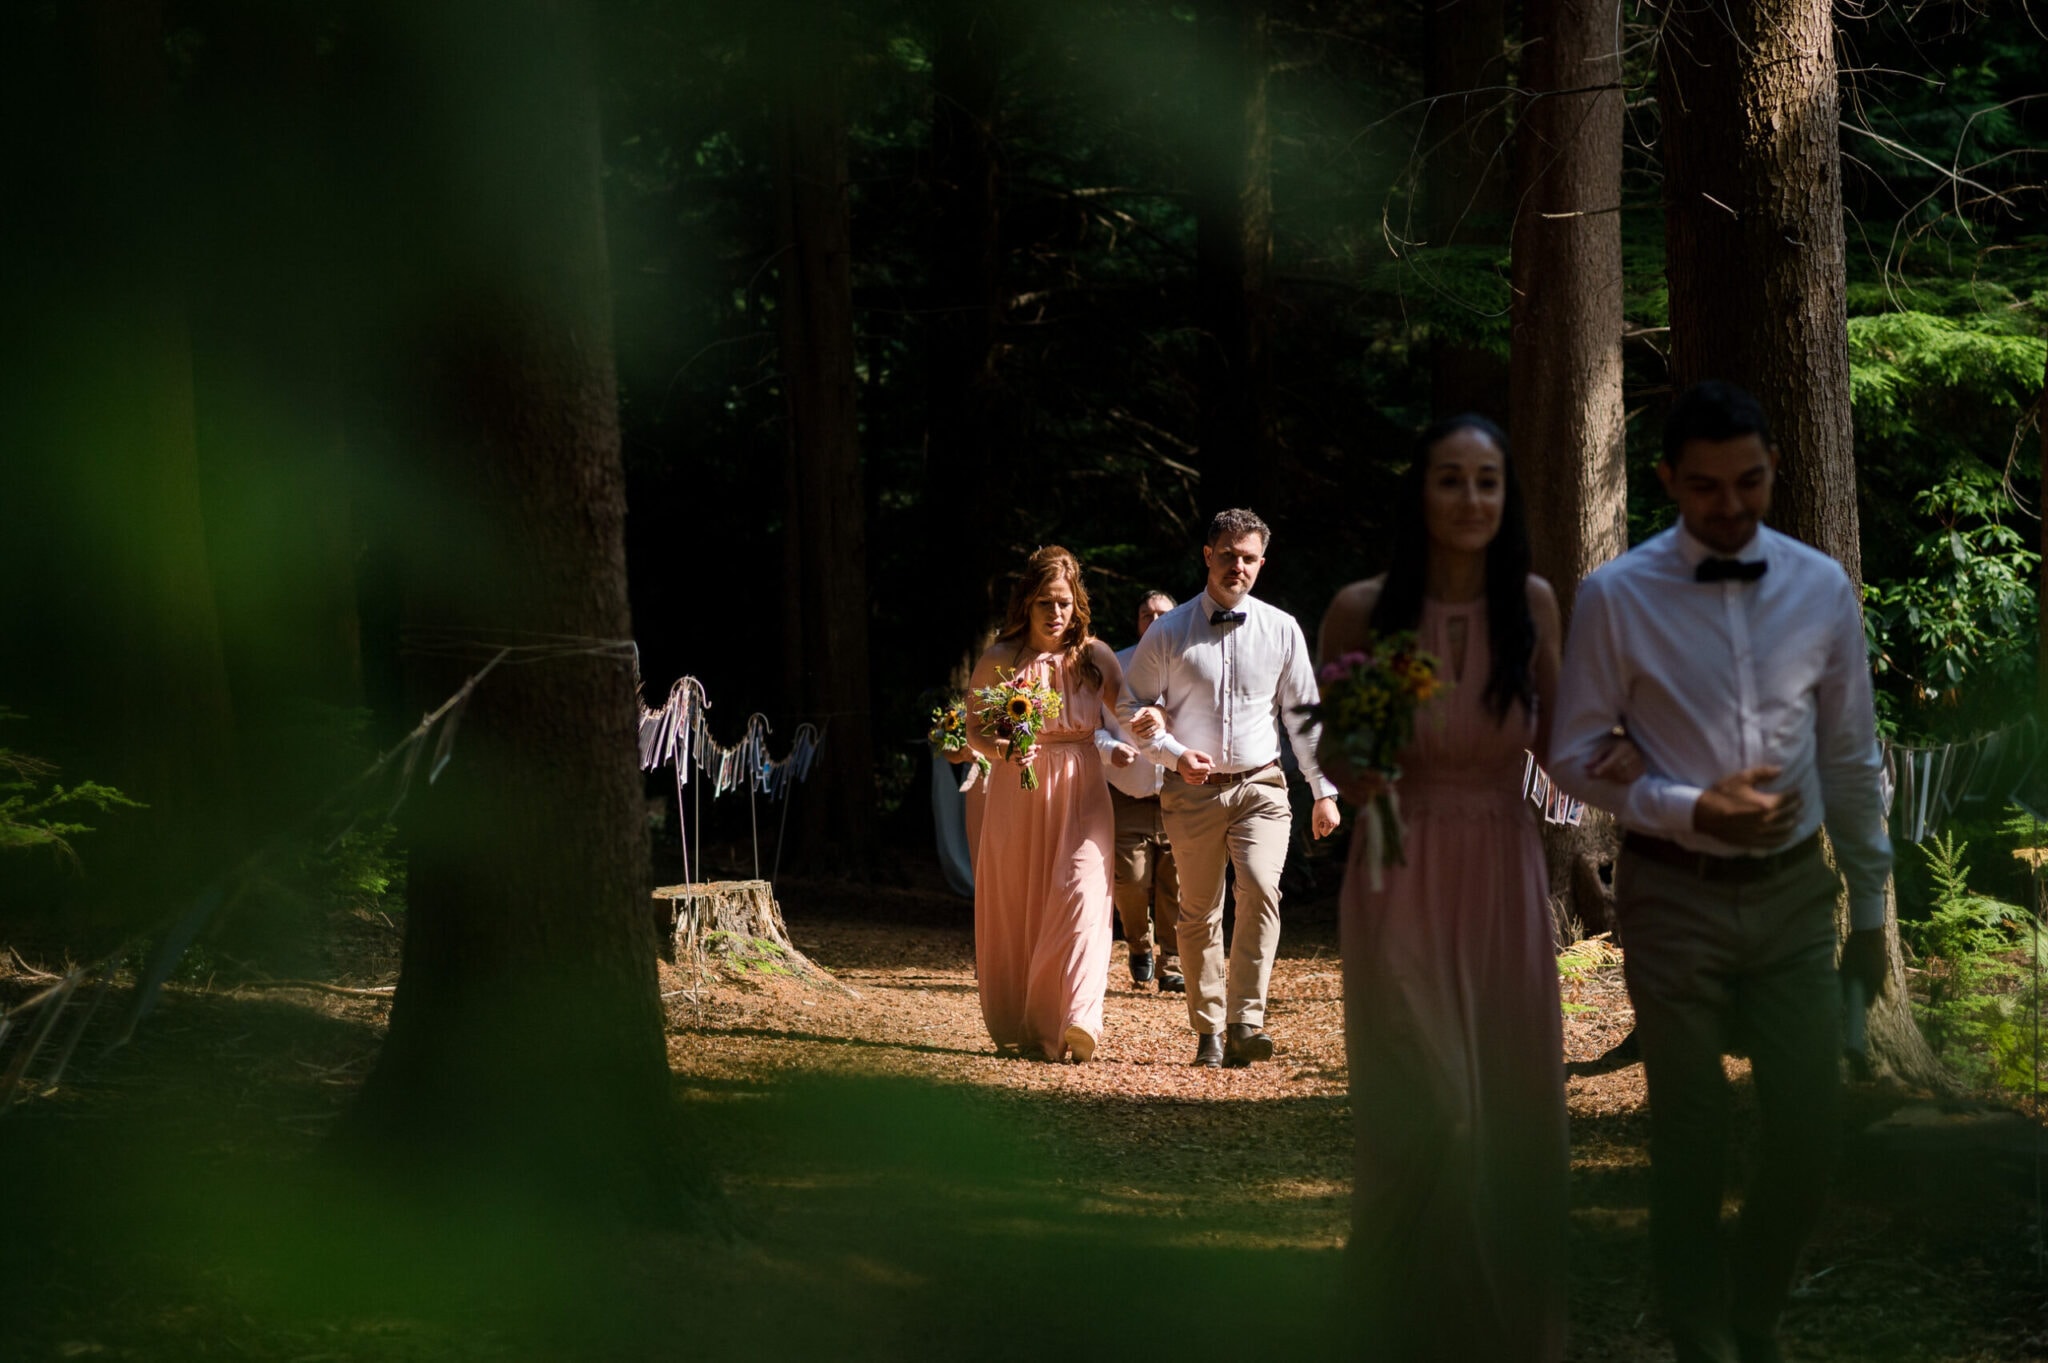 Bridal procession through the wood in the New Forest